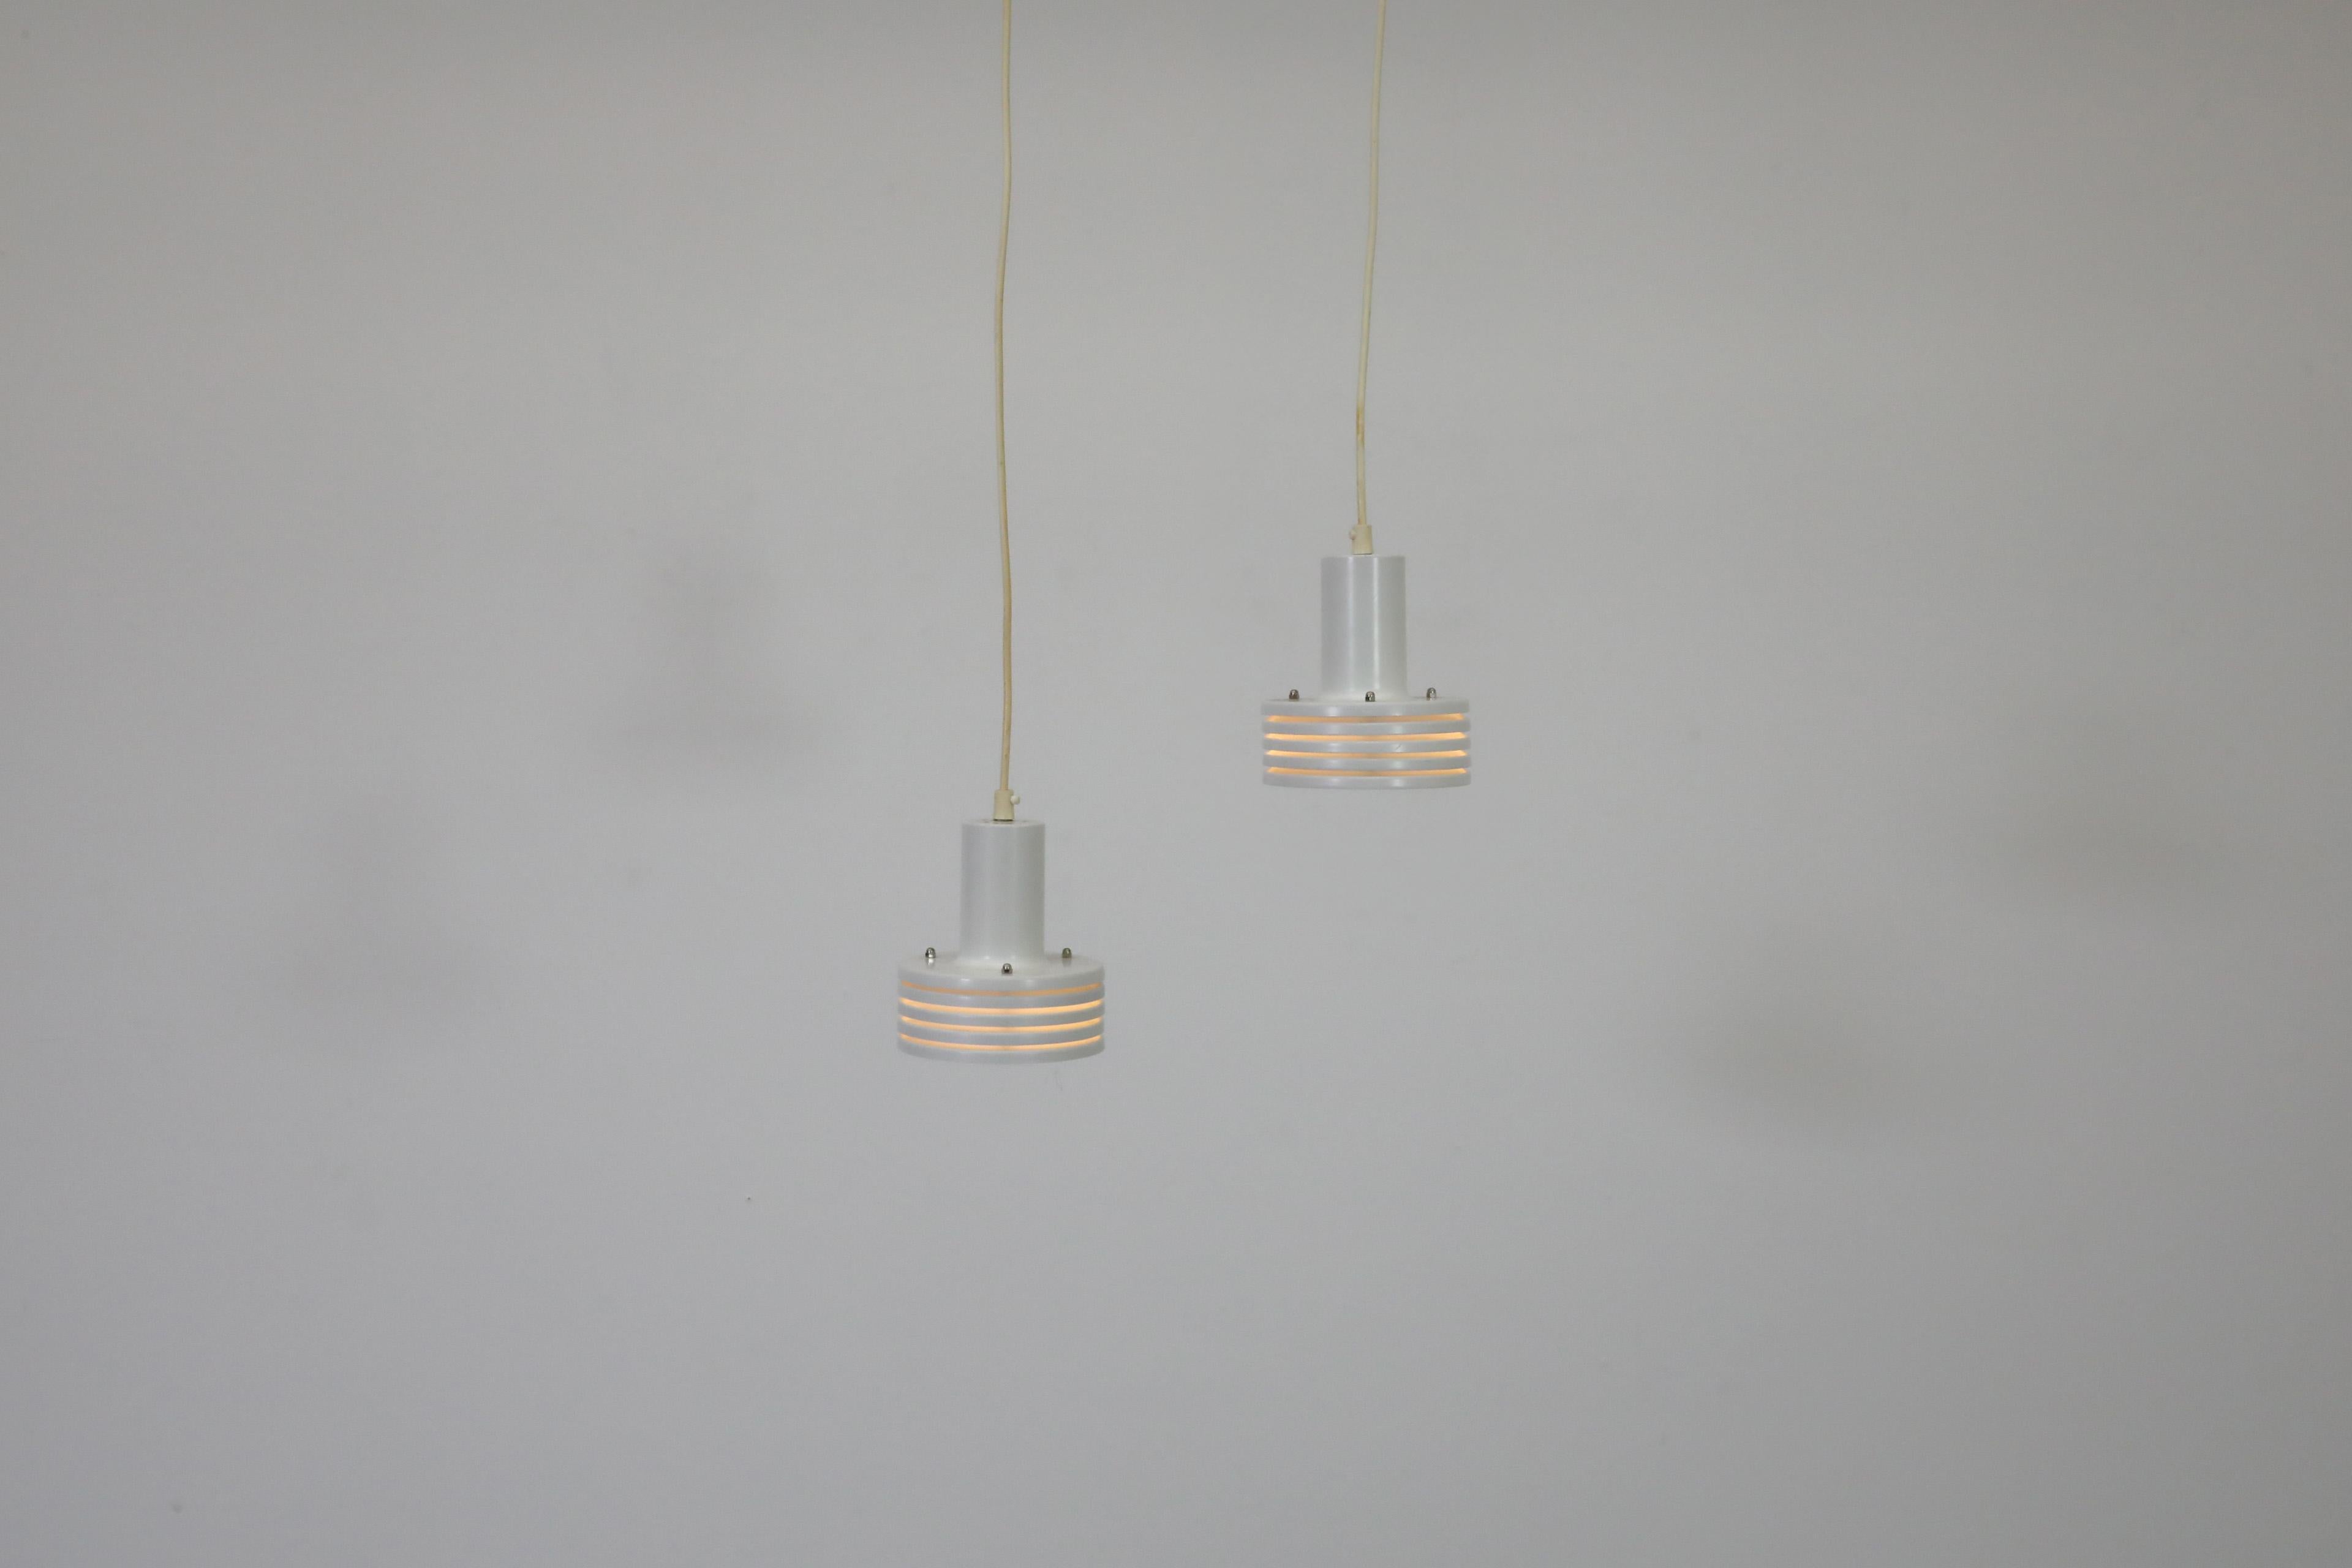 Mid-Century Hans-Agne Jakobsson inspired white enameled metal pendant lights with multi-tiered barrel shade. Attractive pendants with off-white cords perfect for providing ambient lightning to a cozy space or entry way.  In original condition with